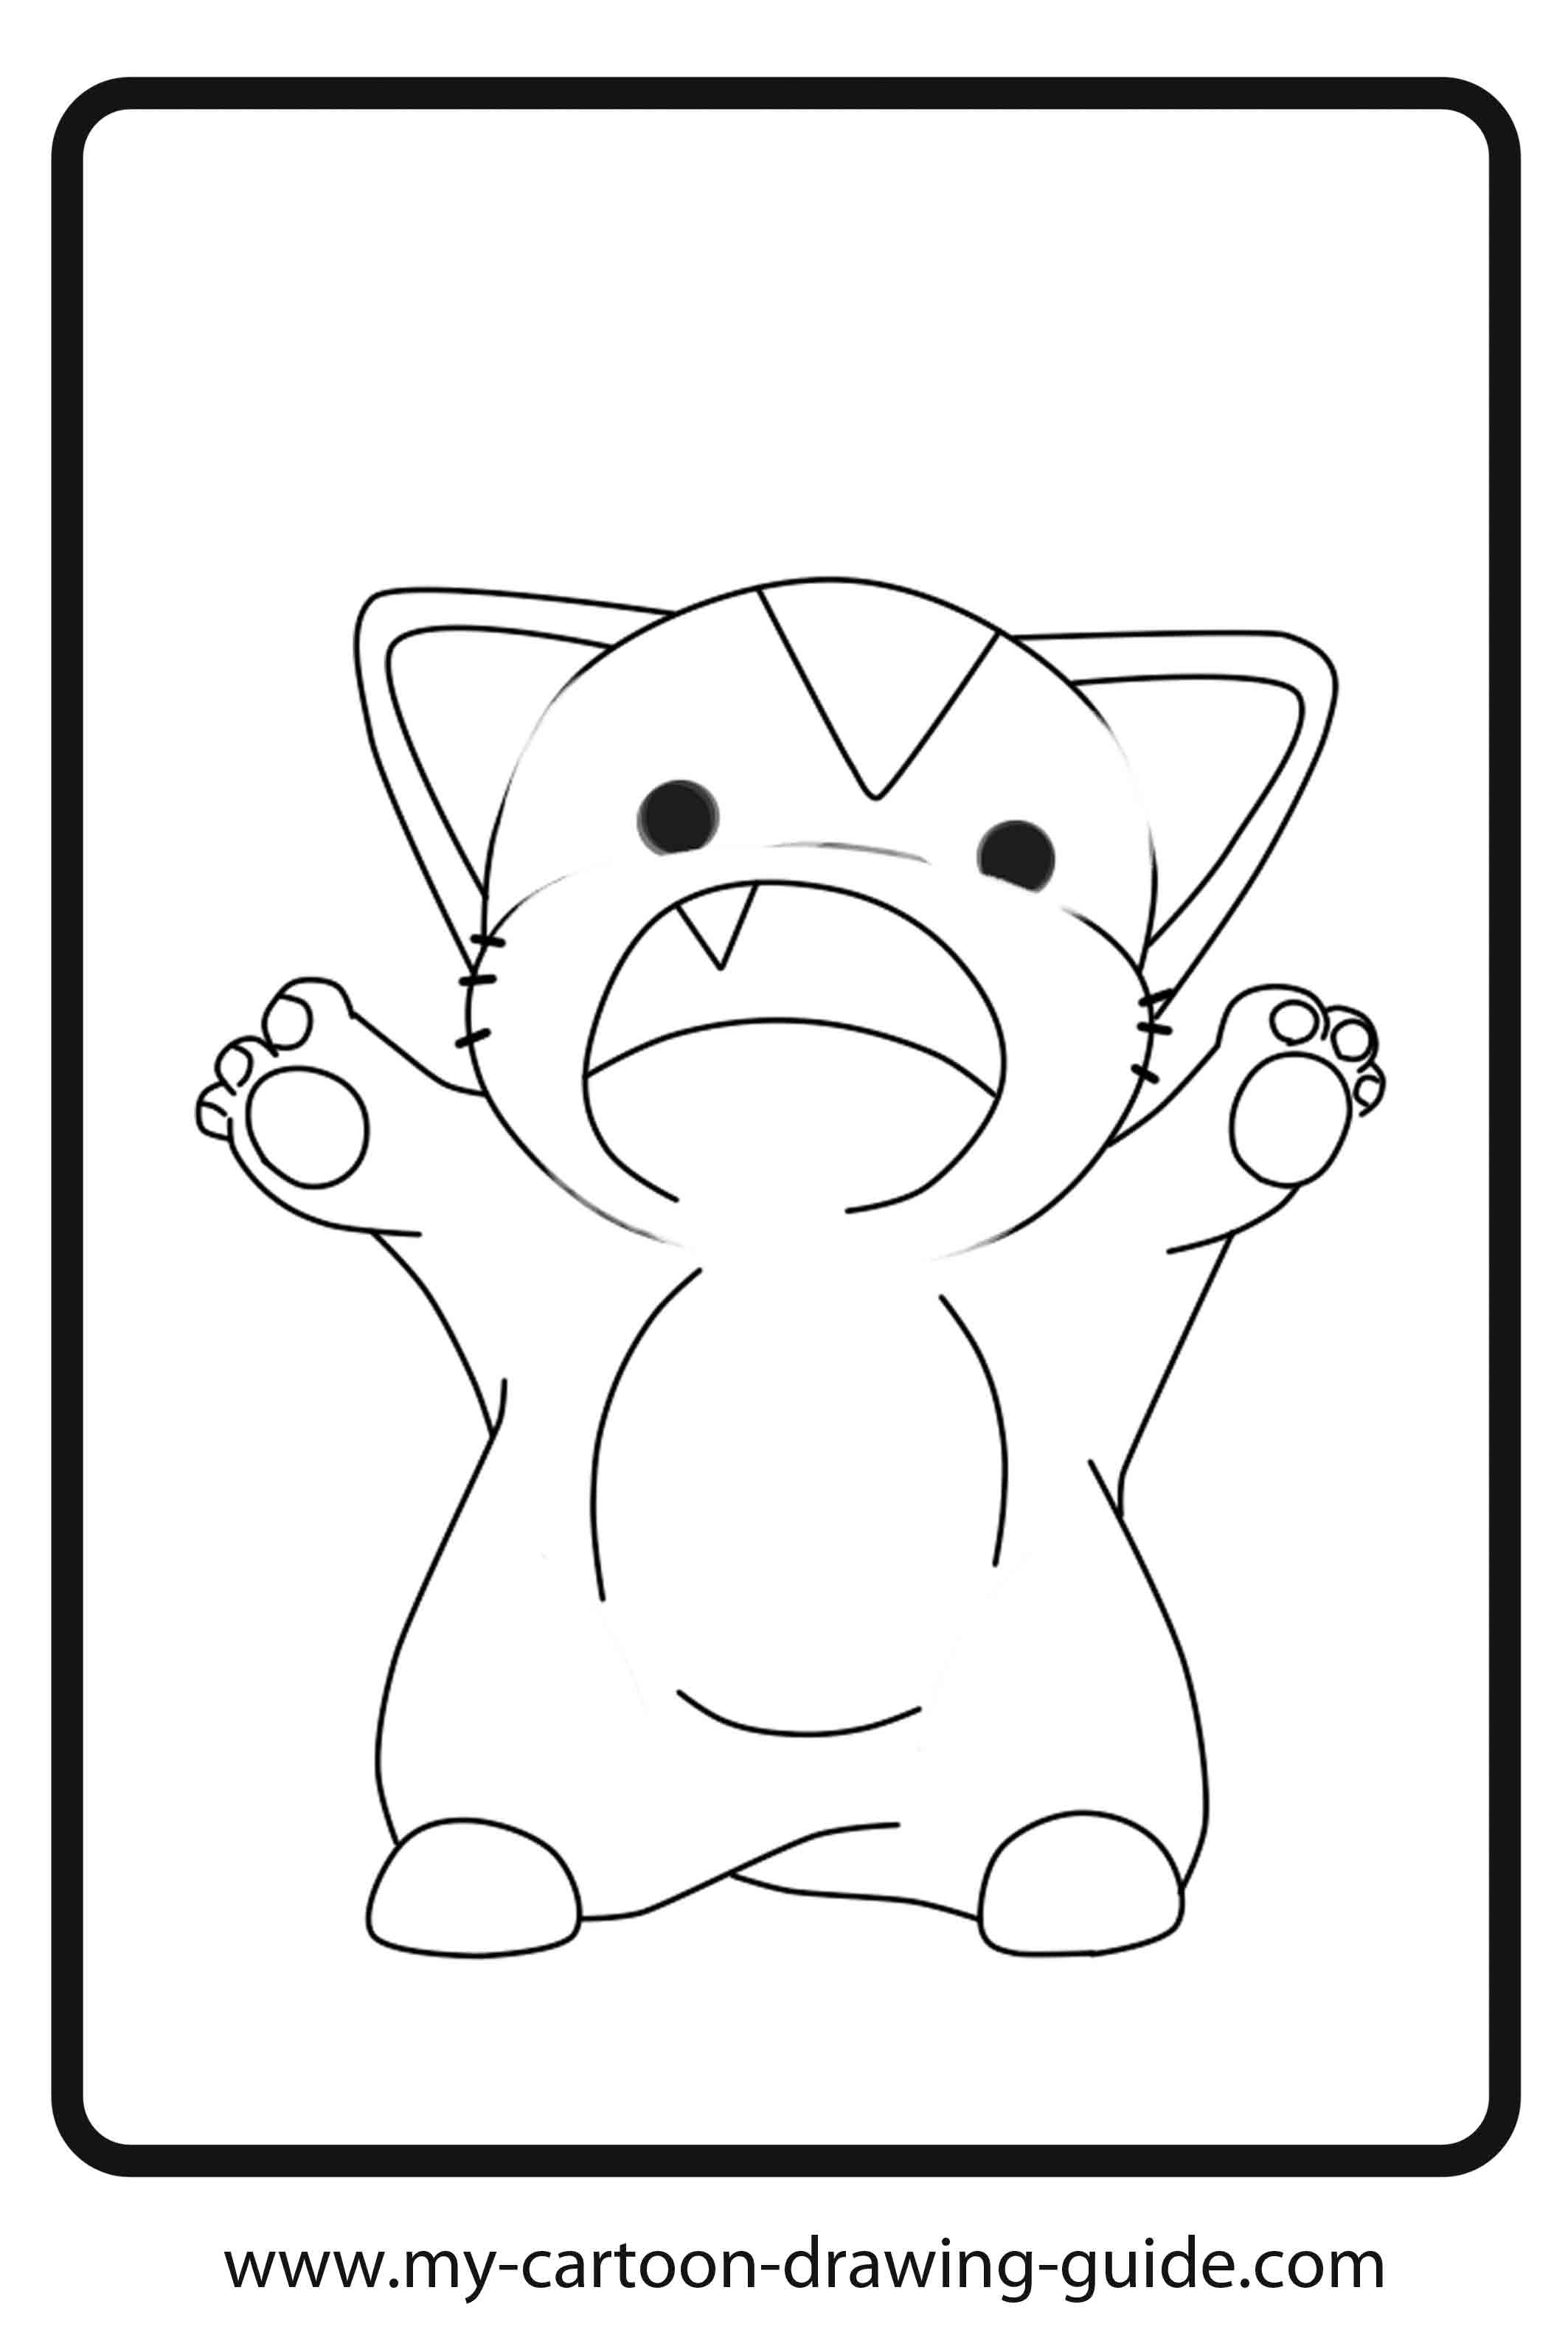 Anime Animal Girl Coloring Pages - Coloring Pages For All Ages